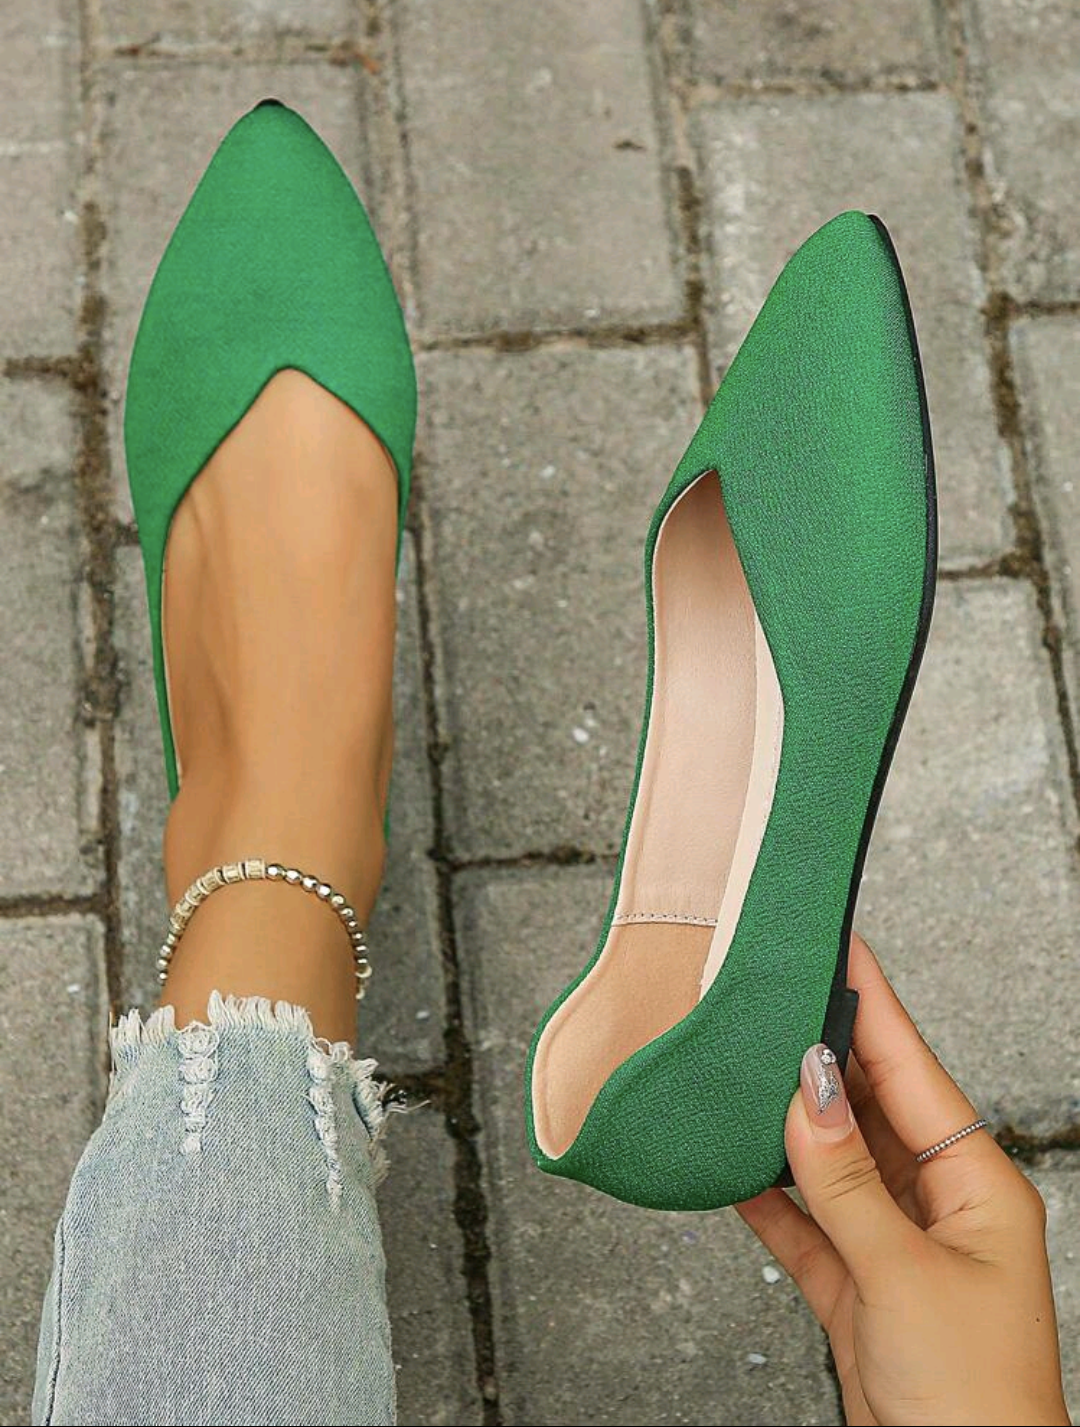 Tinkerbell shoes